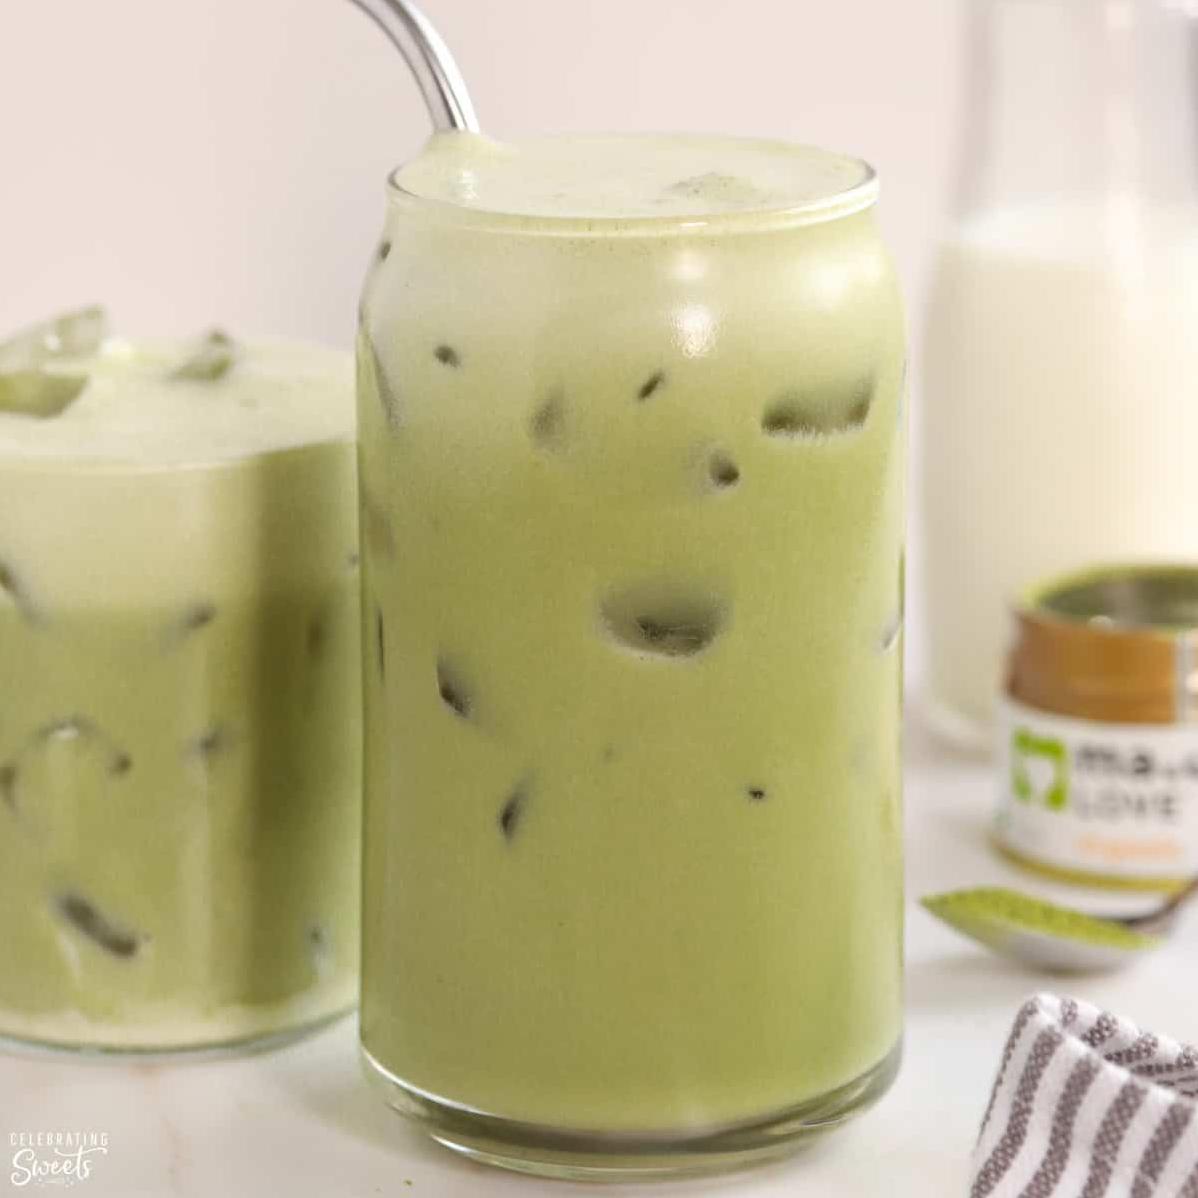  Our Iced Matcha Latte is as beautiful as it is delicious.